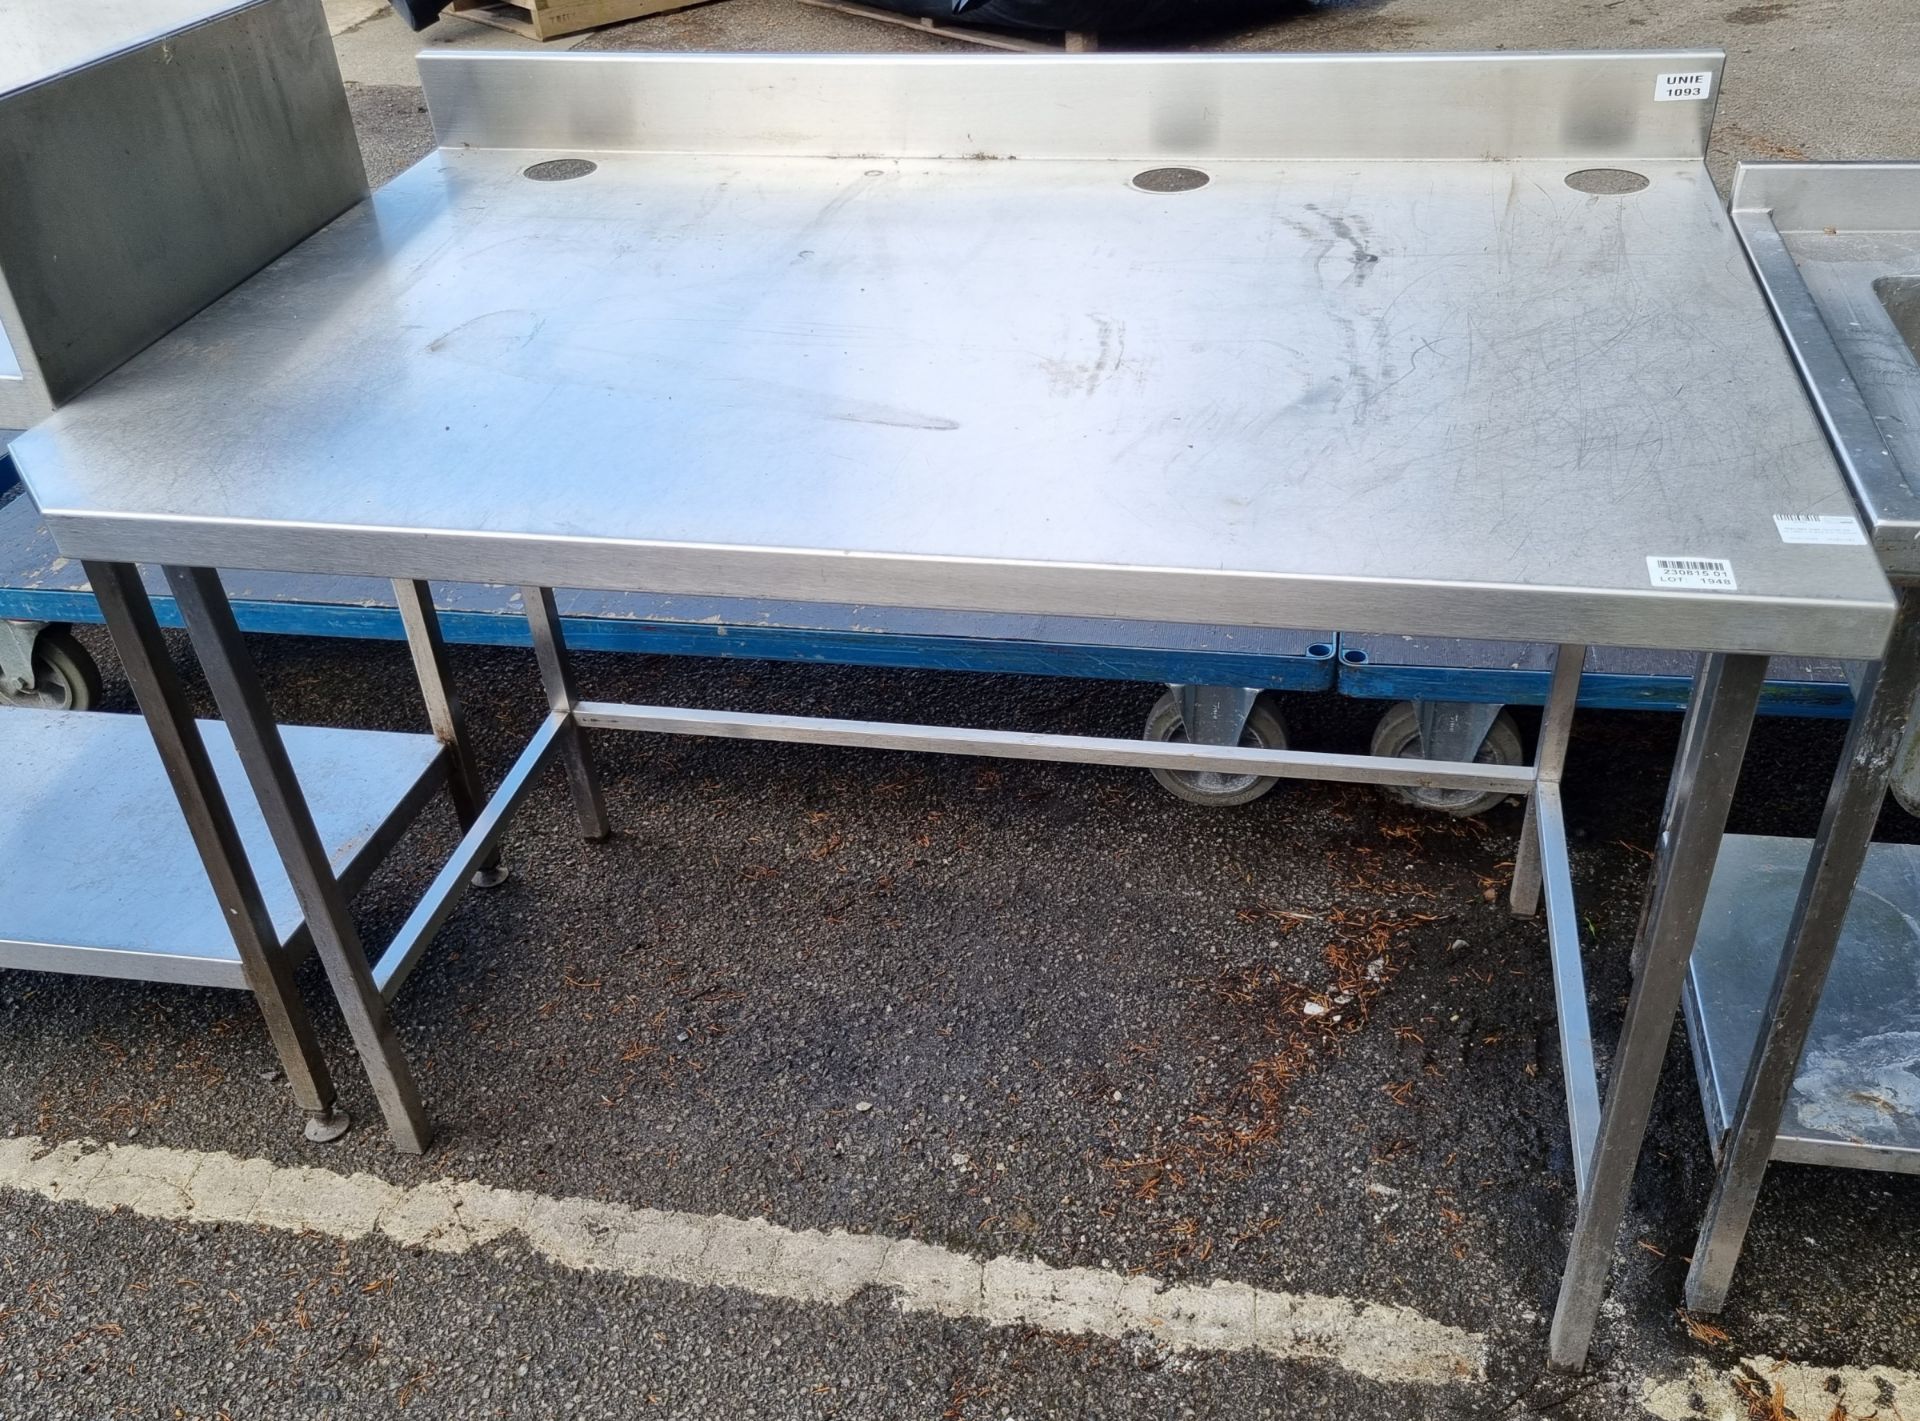 Stainless steel countertop - W 1400 x D 910 x H 1020mm